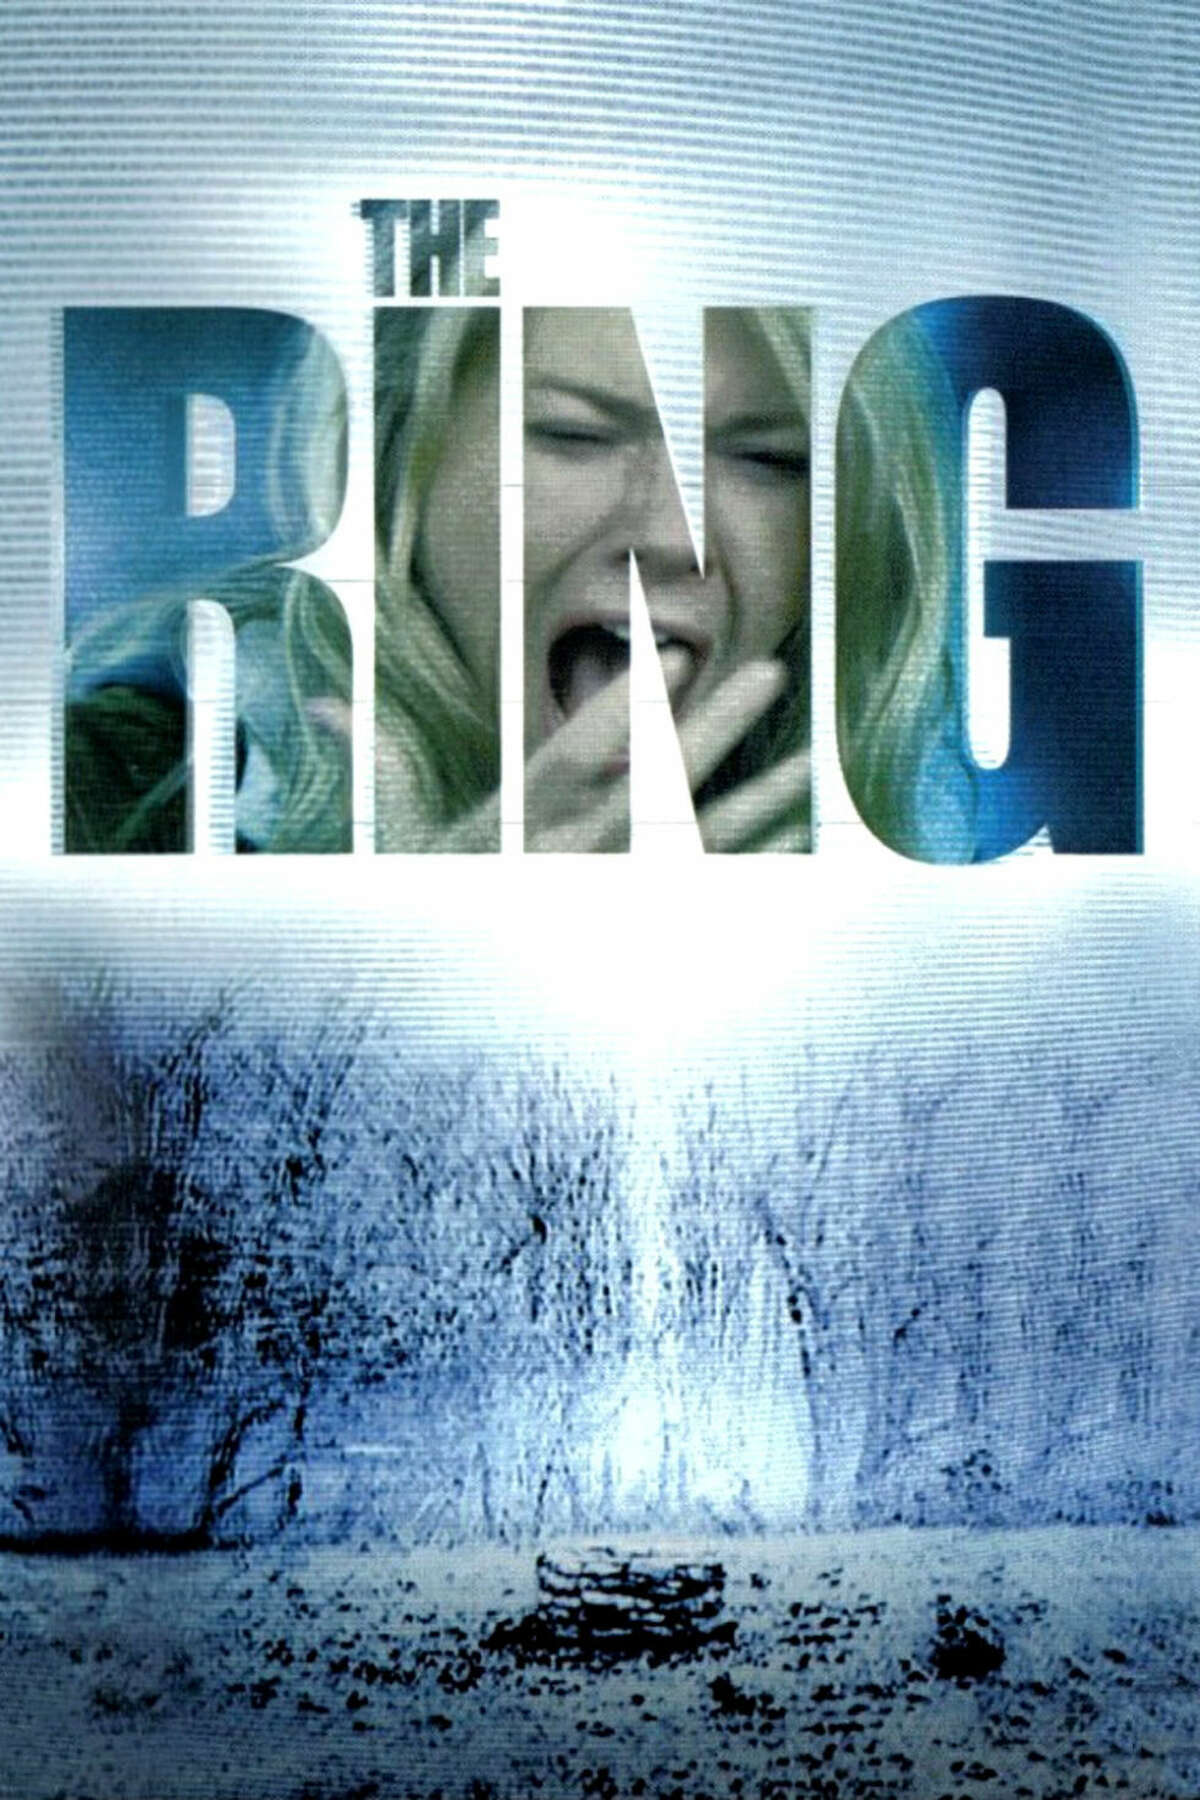 The Ring (2002) Where to find it: Netflix Seattle/Washington tie-in: We've got an affinity for this one here at the P-I as the main character plays a Seattle Post-Intelligencer reporter -- back when we had a print paper. The movie was also filmed around Washington, in towns like Monroe, Oak Harbor, Stanwood and of course, Seattle.